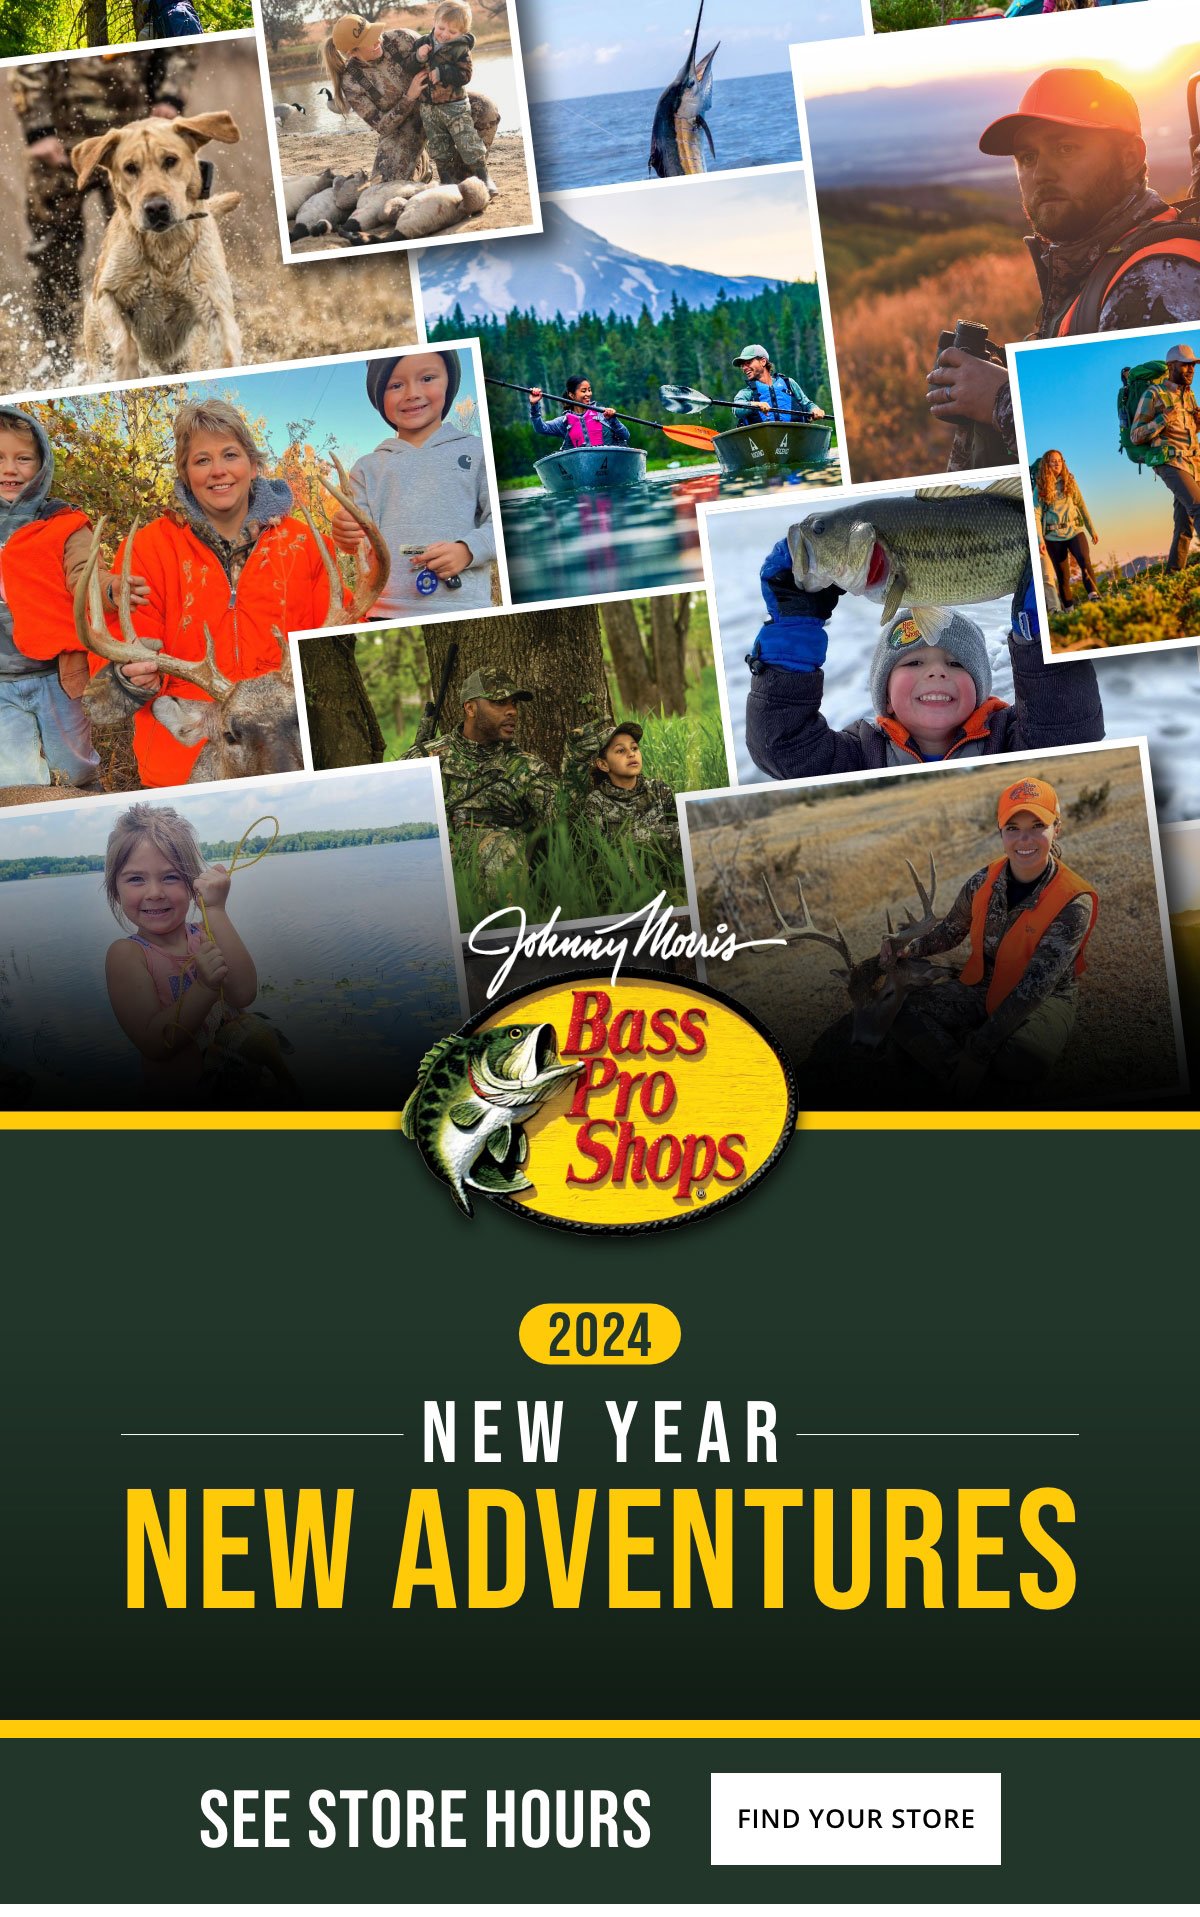 Bass Pro Shops: New Year – New Adventures!